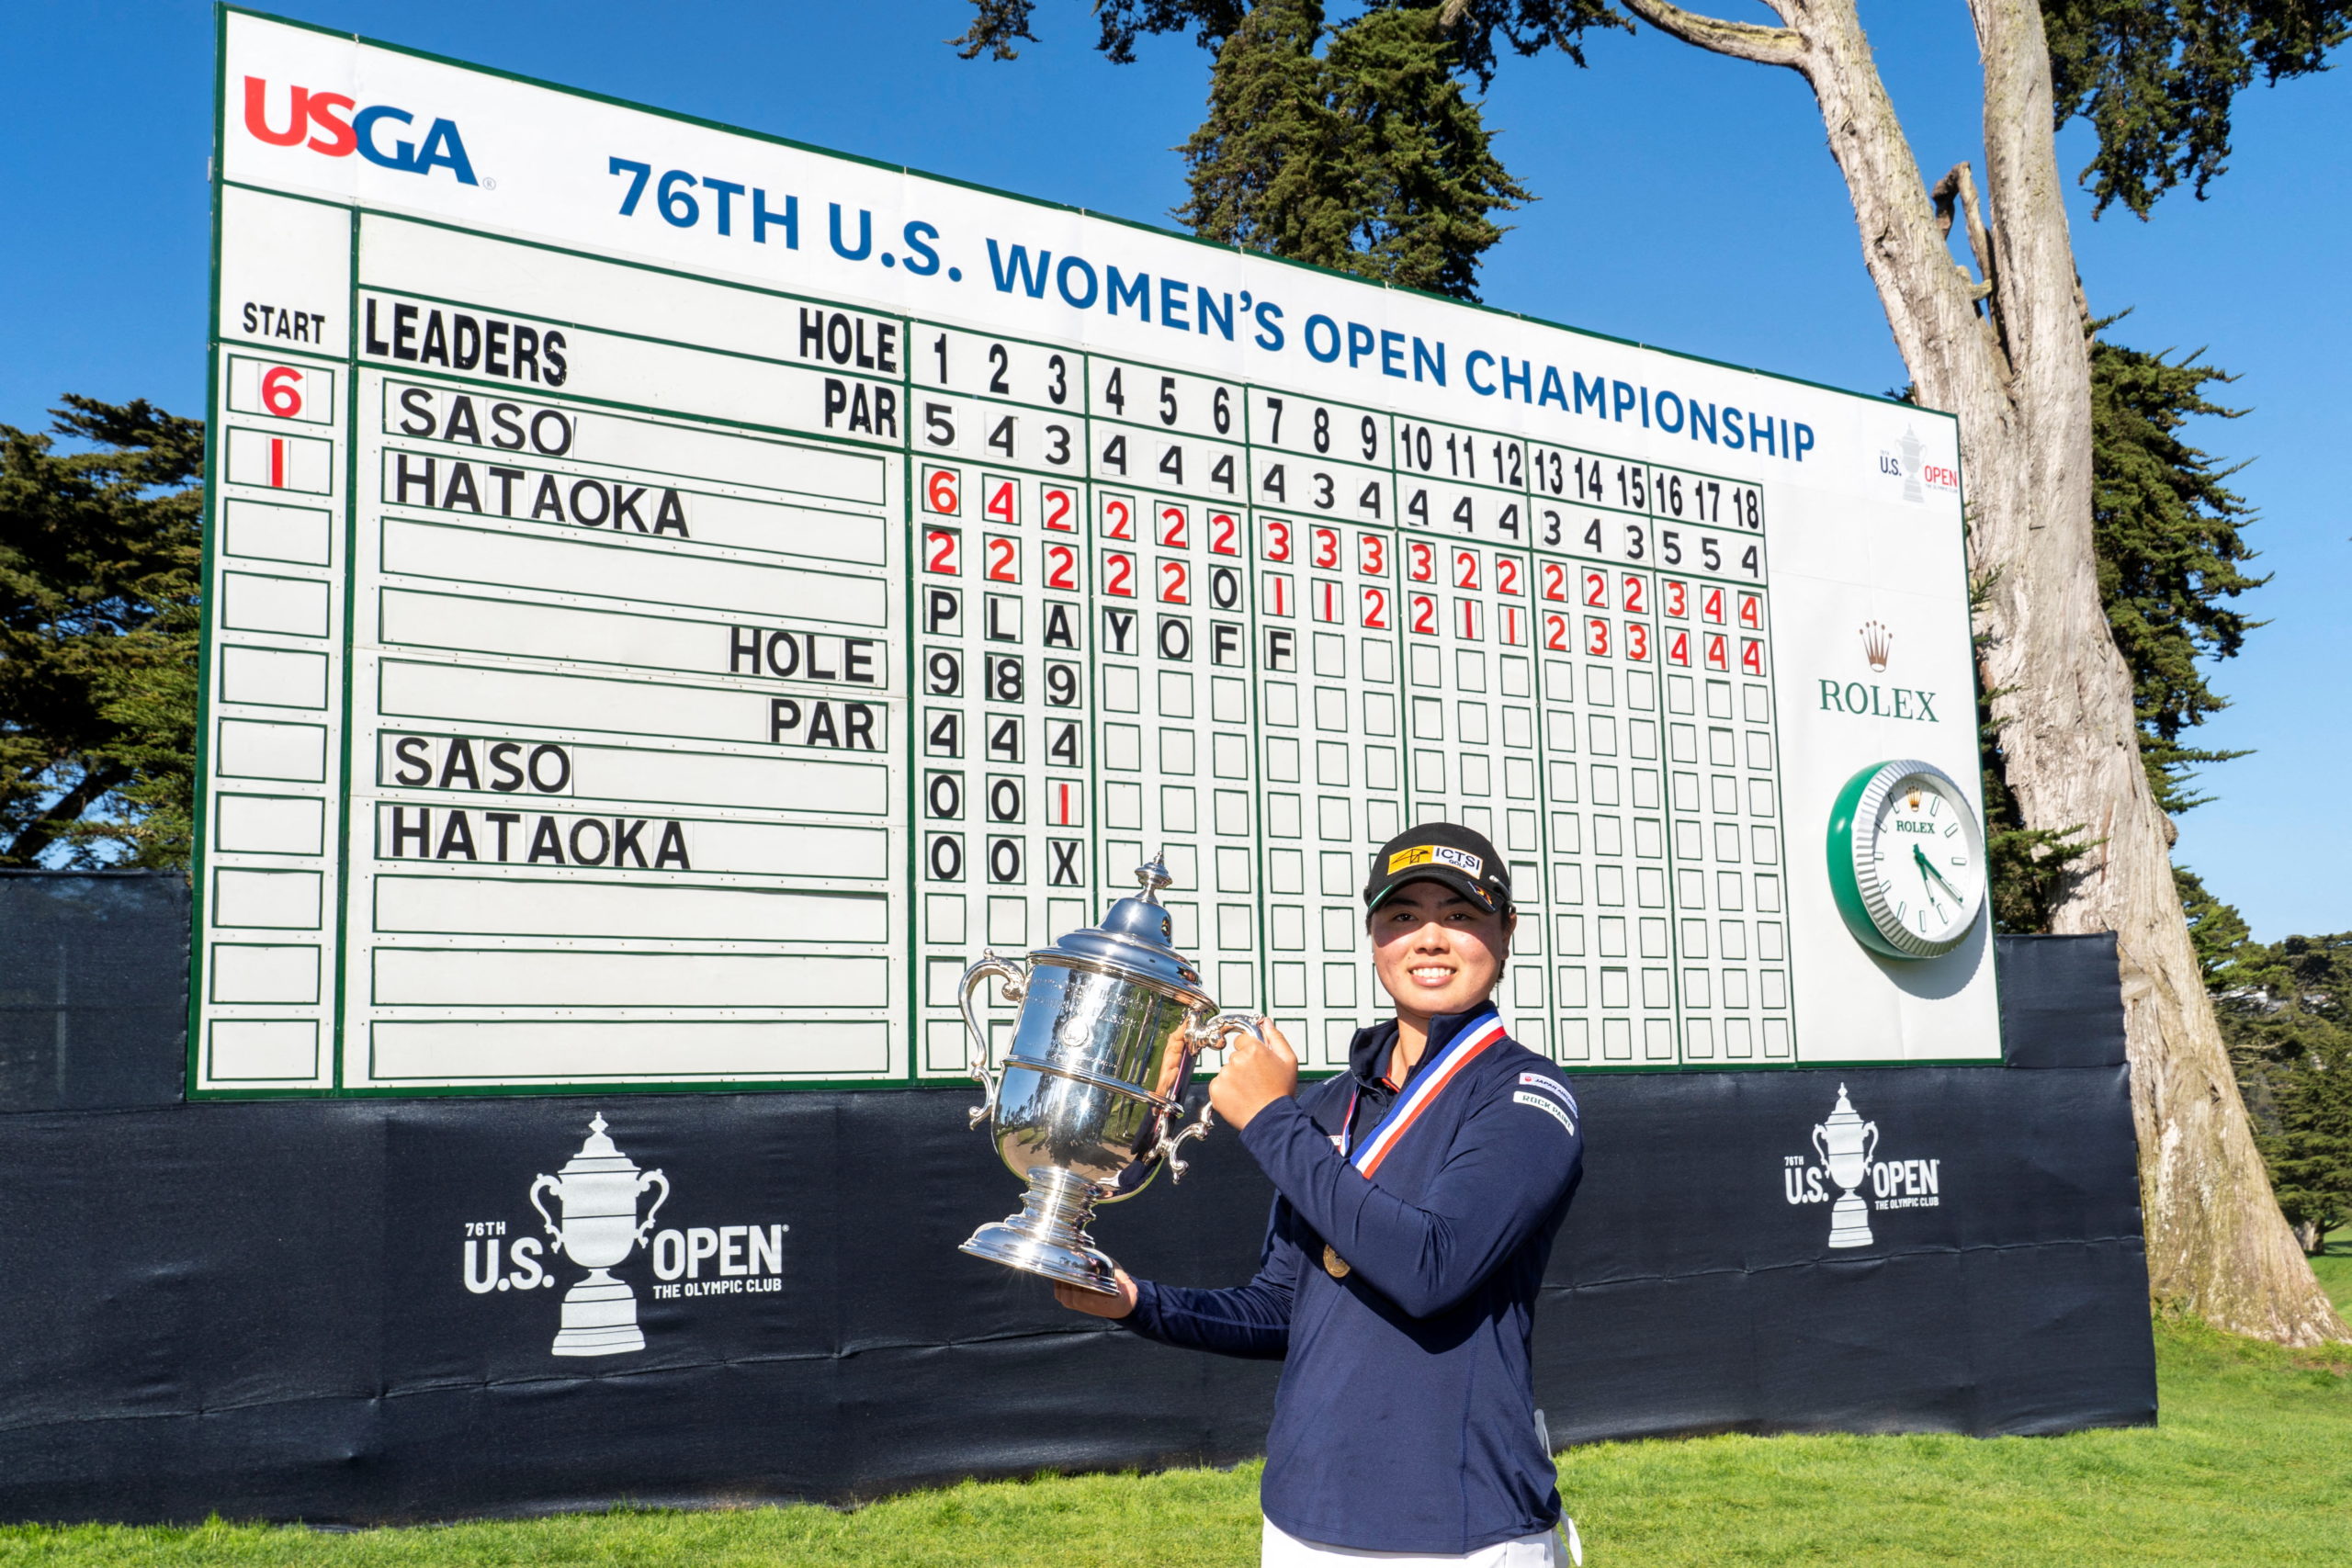 PHOTO FILE: June 6, 2021;  San Francisco, California, USA;  Yuka Saso lifts the US Open trophy after winning a surprise playoff against Nasa Hataoka following the final round of the US Open women's golf tournament at The Olympic Club.